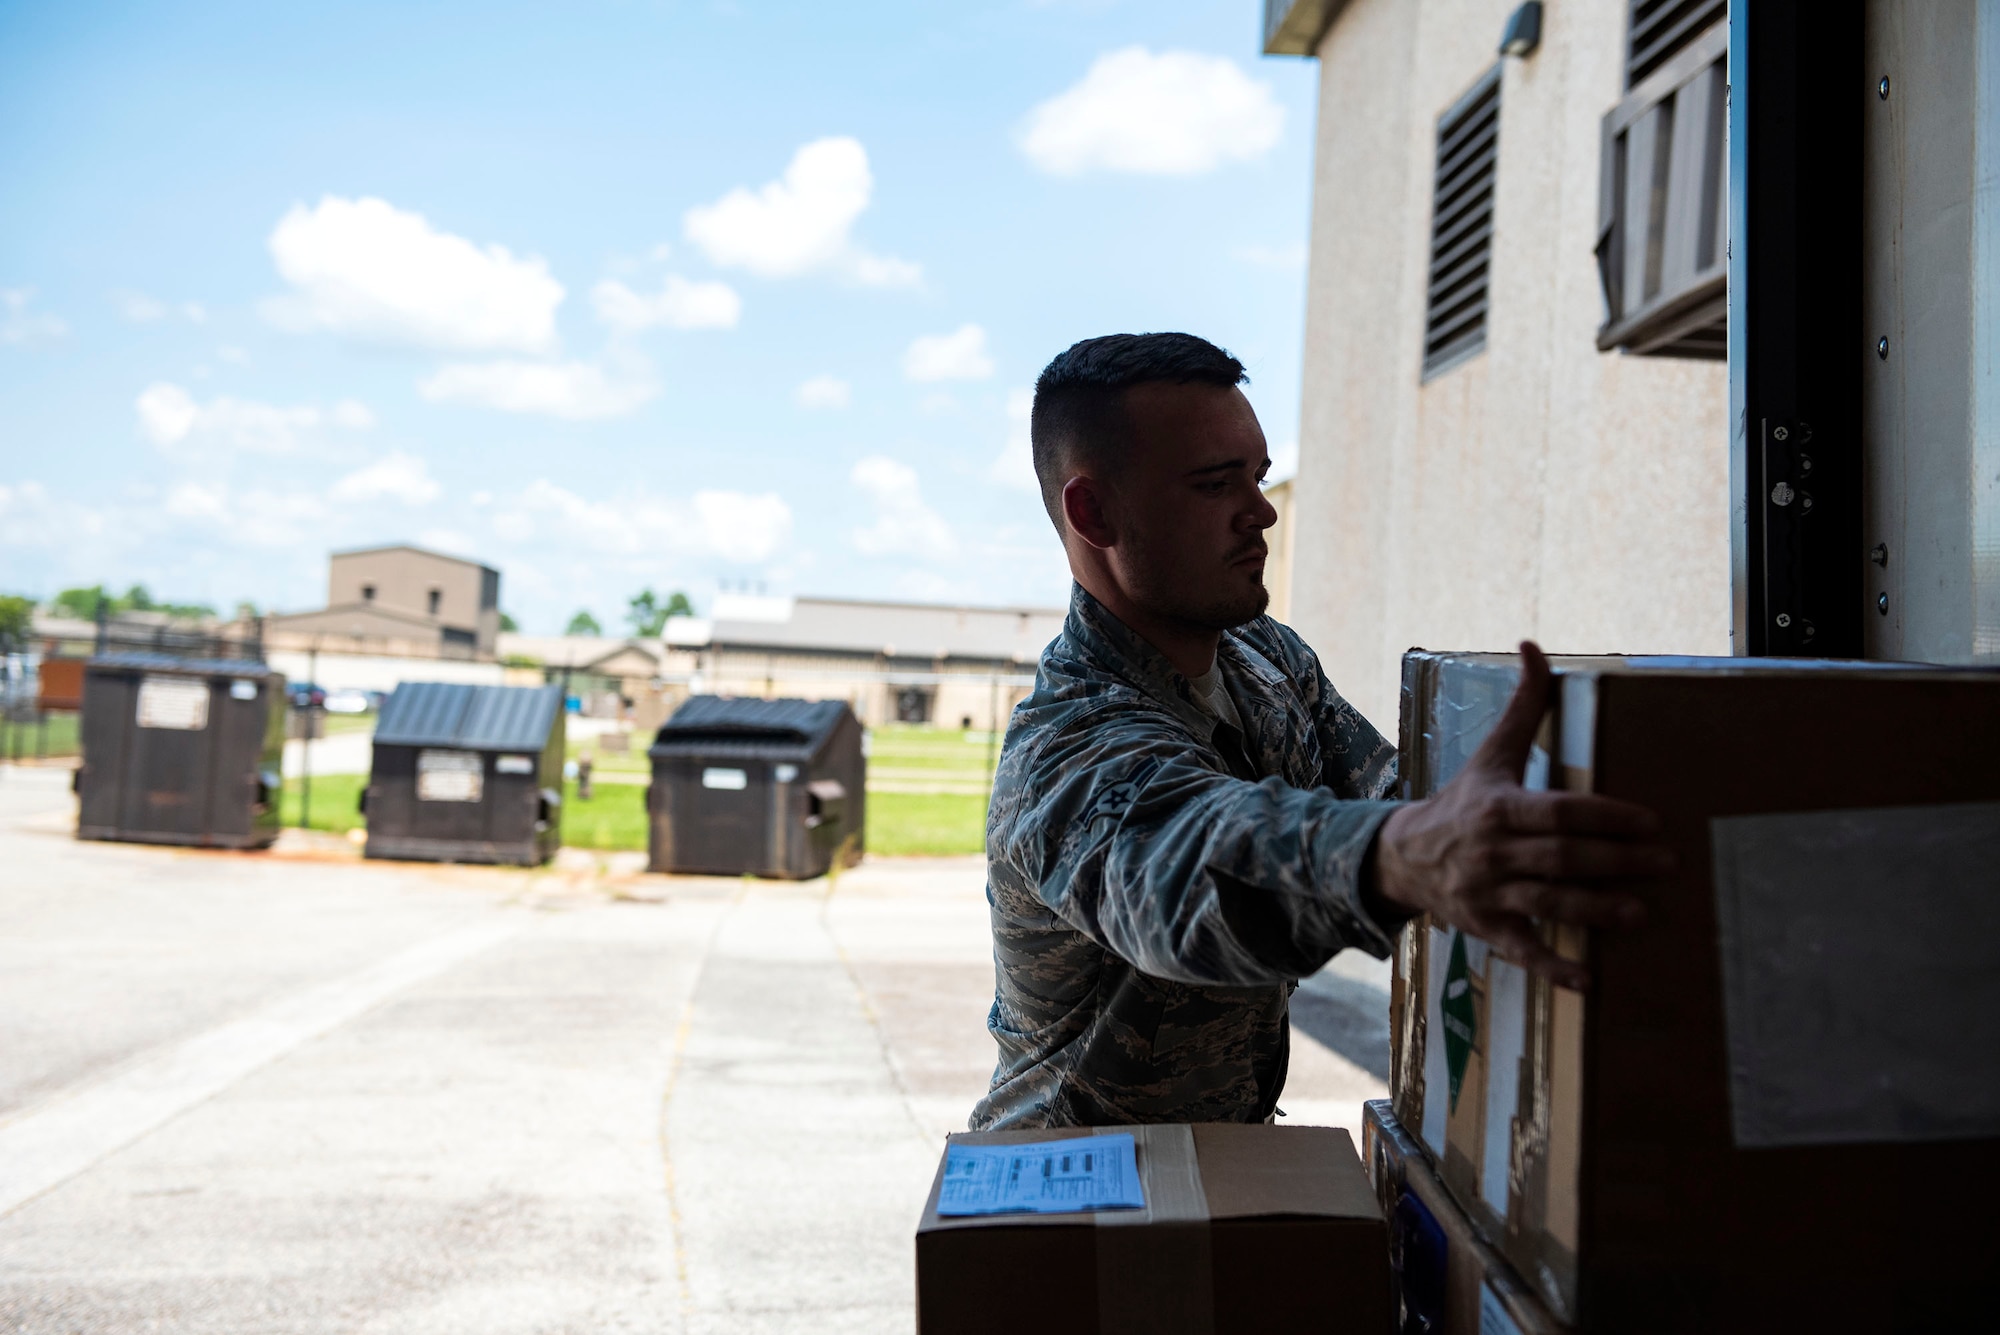 Airman 1st Class Timothy Hankins, 23d Logistics Readiness Squadron documented cargo operator, unloads cargo during a cargo sweep, Aug. 13, 2019, at Moody Air Force Base, Ga. The documented cargo section is responsible for transporting mission-critical equipment and material to squadrons across the base, which helps facilitate mission execution. (U.S. Air Force photo by Senior Airman Erick Requadt)